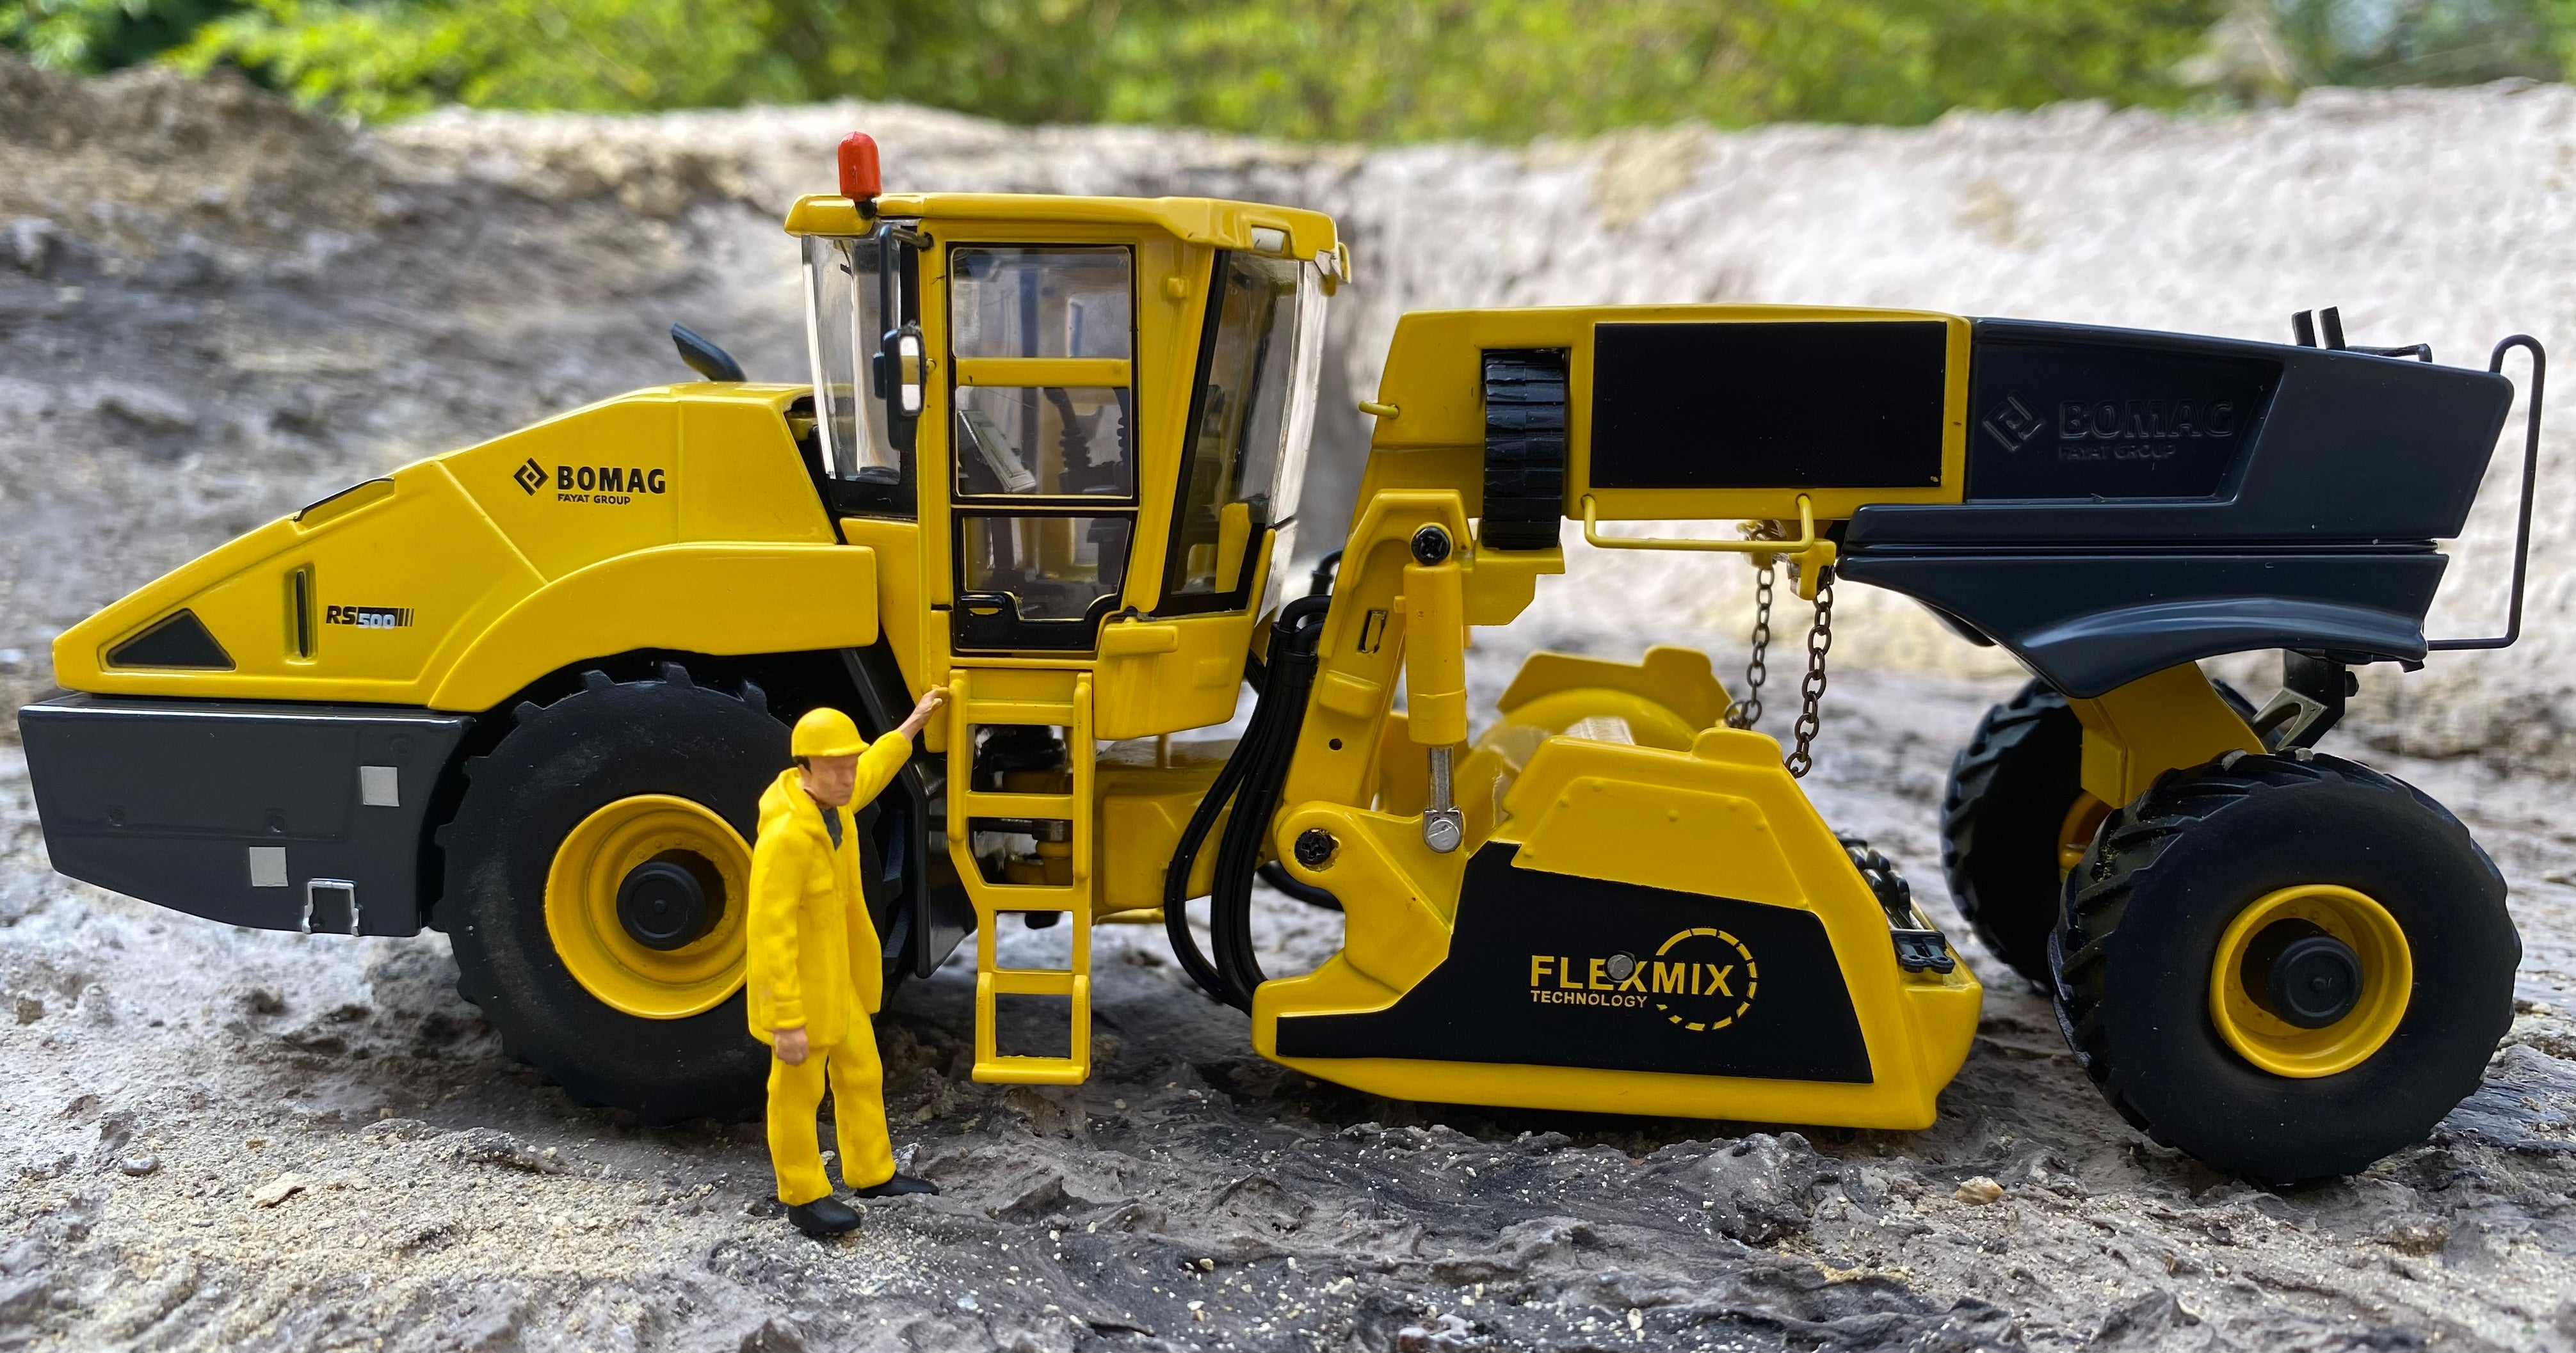 BOMAG RS 500 Recycler. 1:50 scale